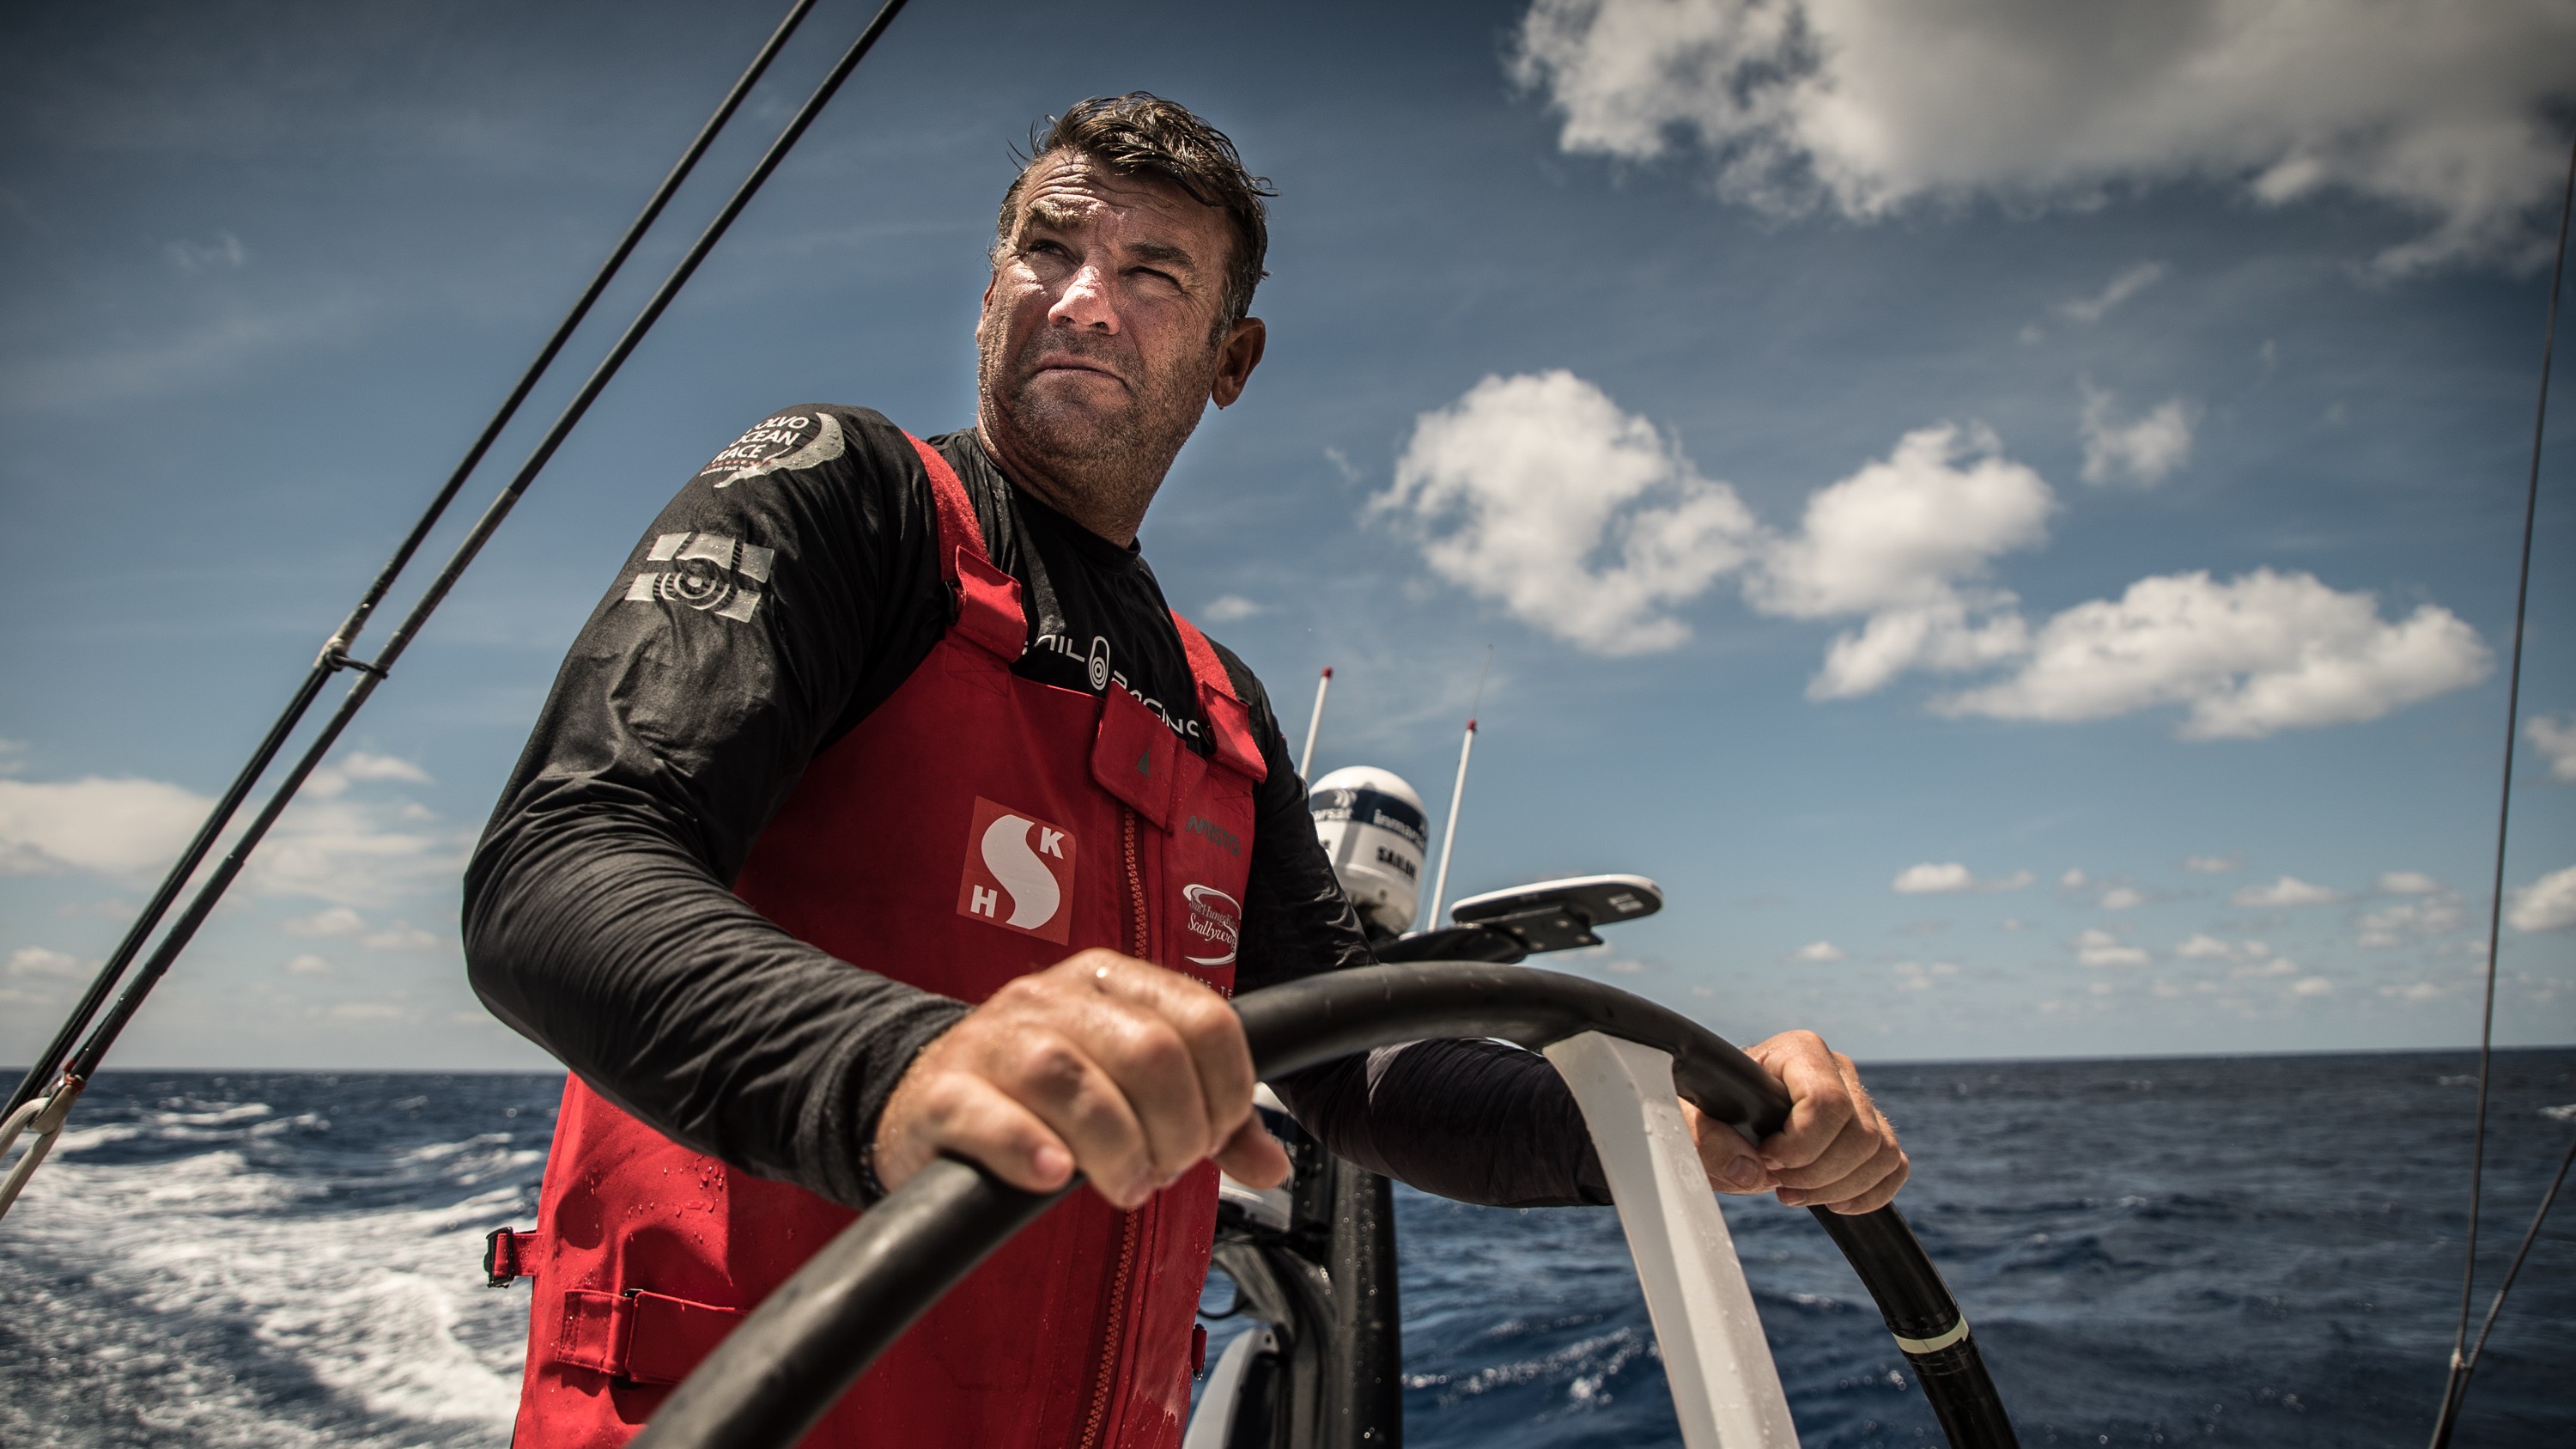 David Witt, skipper of Hong Kong’s Sun Hung Kai/Scallywag, says the decision to ignore the city for the next edition is ‘a disgrace’. Photo: The Ocean Race